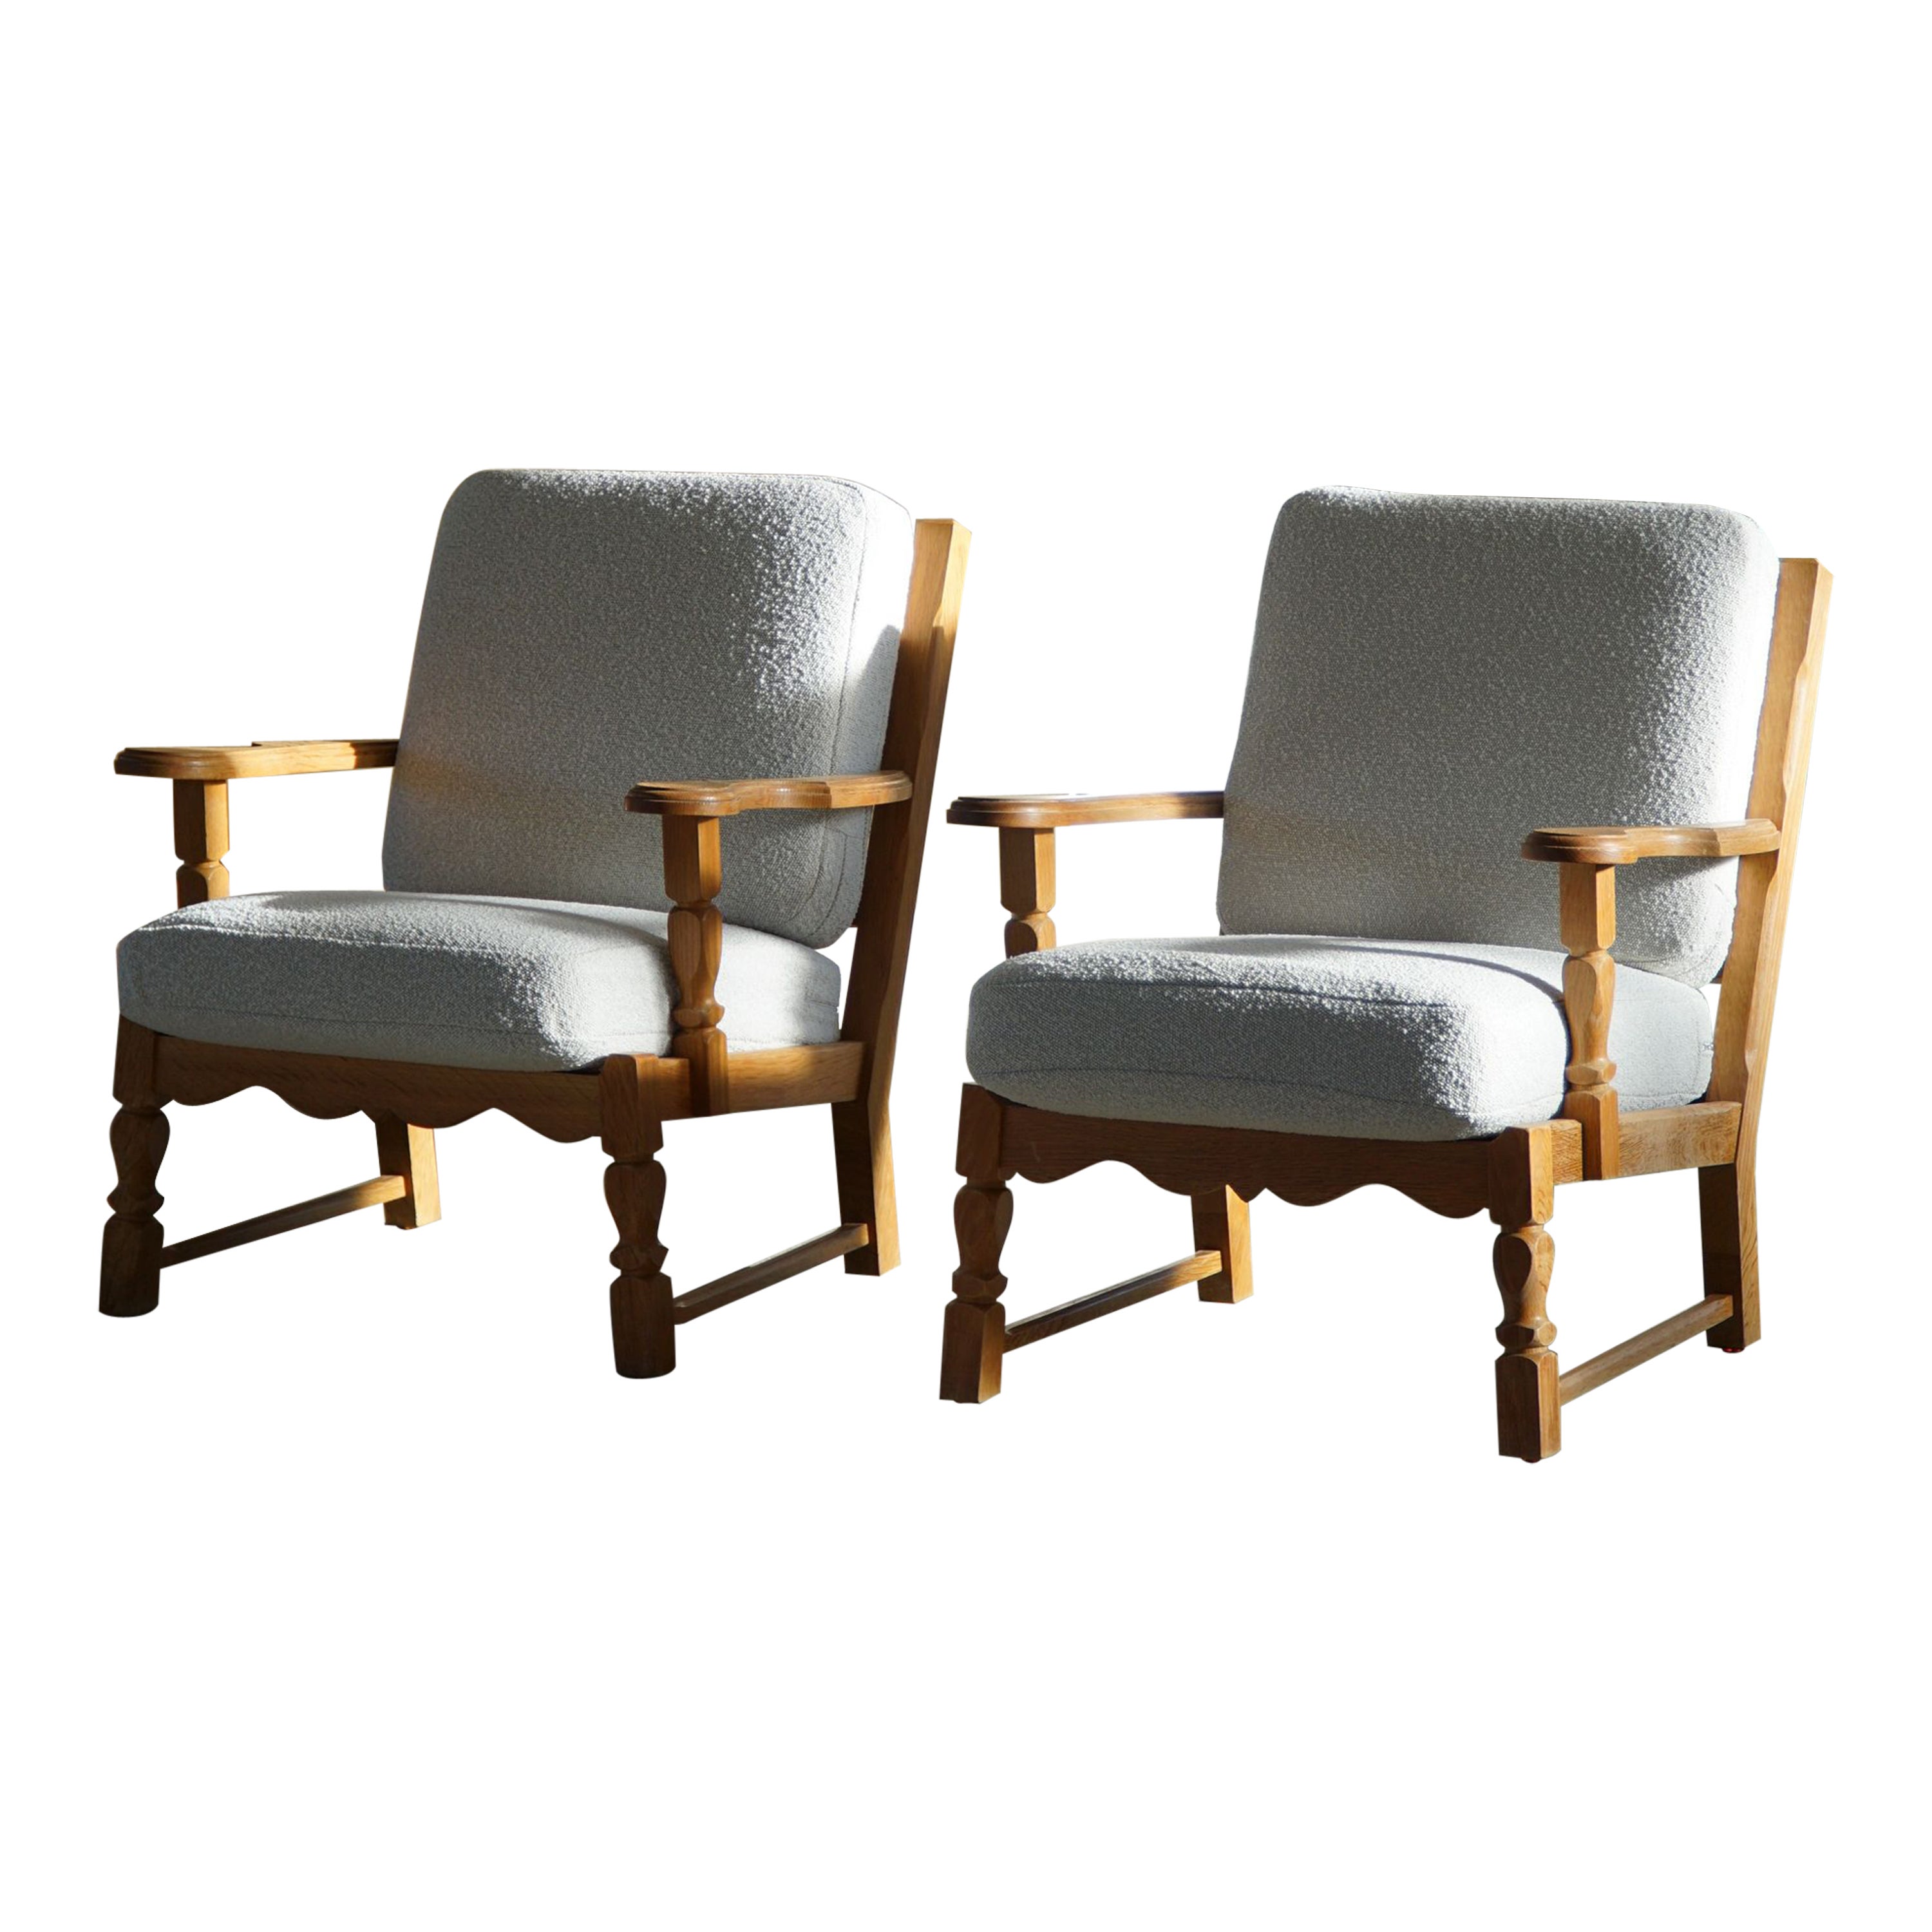 Danish Modern Pair of Lounge Chairs in Oak & Reupholstered in Bouclé, 1960s